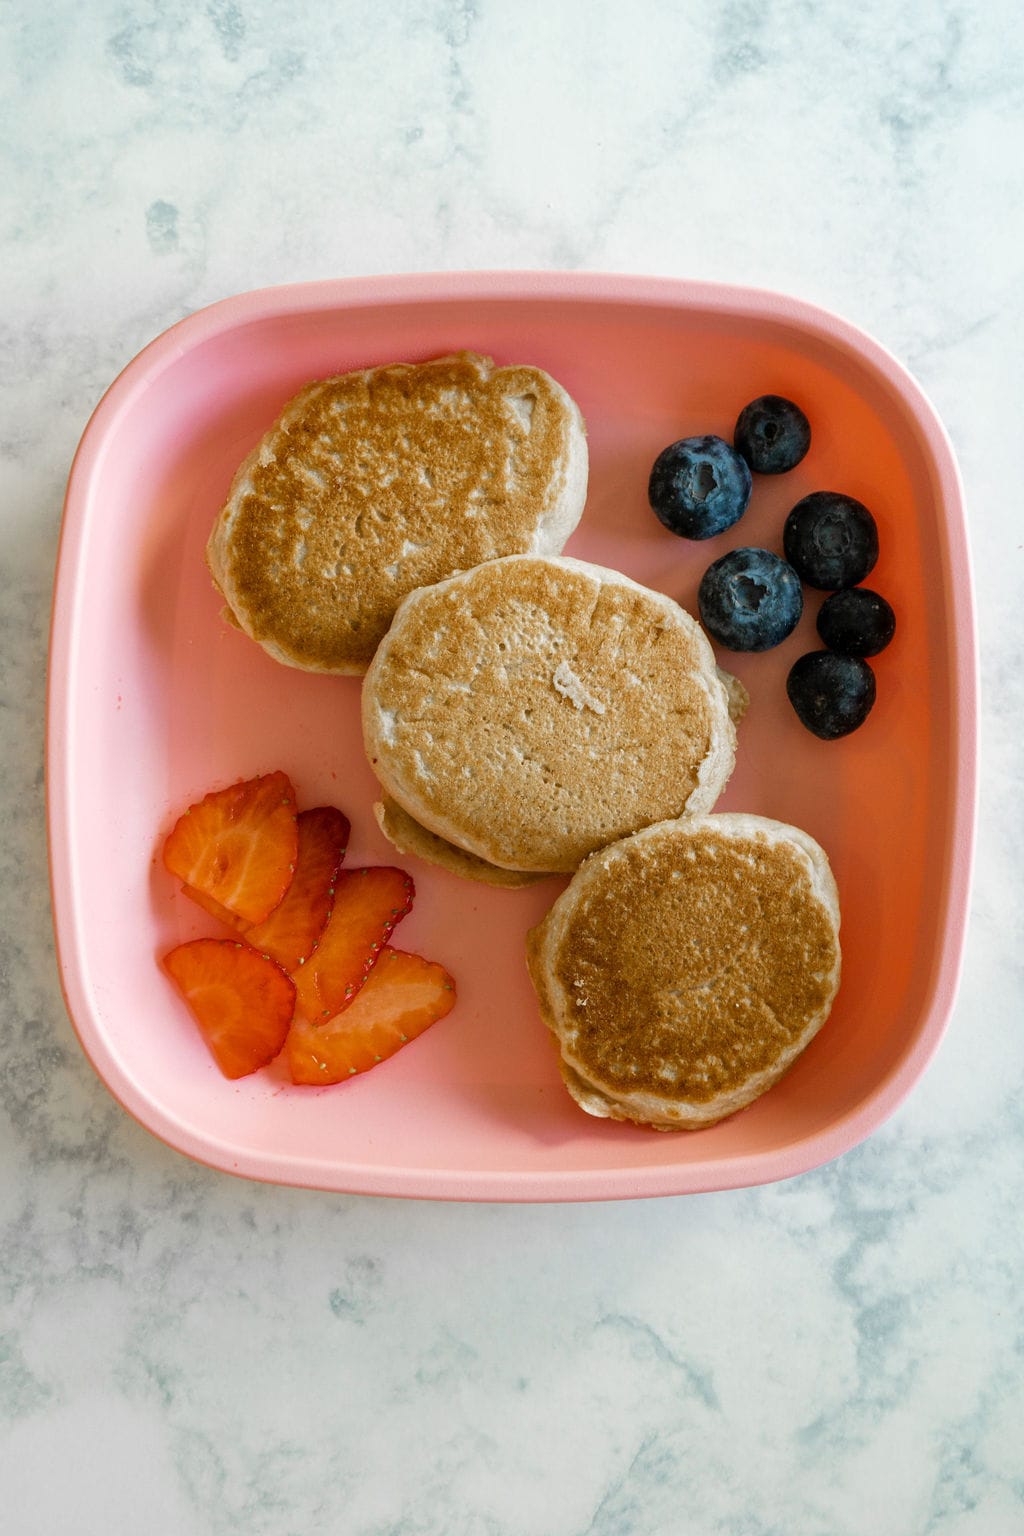 Pink kid's plate with pancakes and fruit.